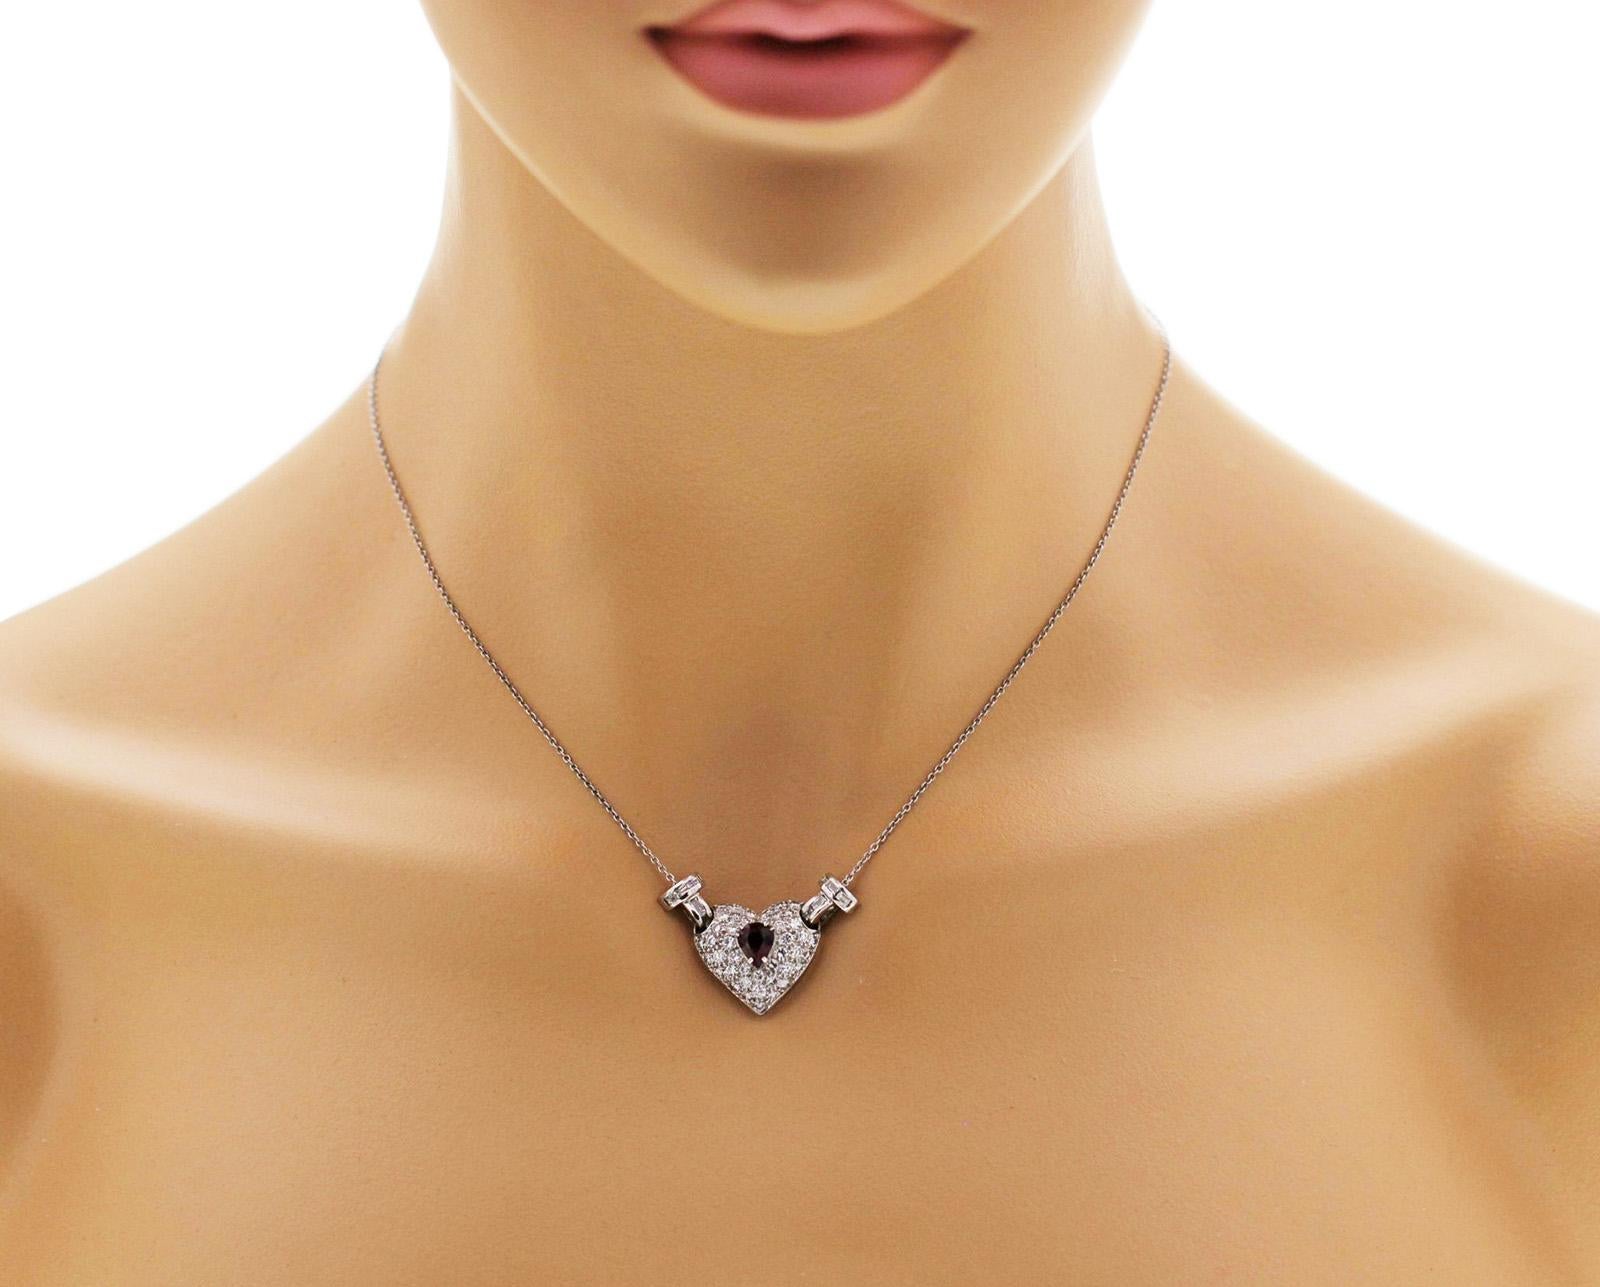 Women's 18 Karat White Gold 1.28 Carat Diamonds and 0.50 Carat Ruby Heart Necklace For Sale